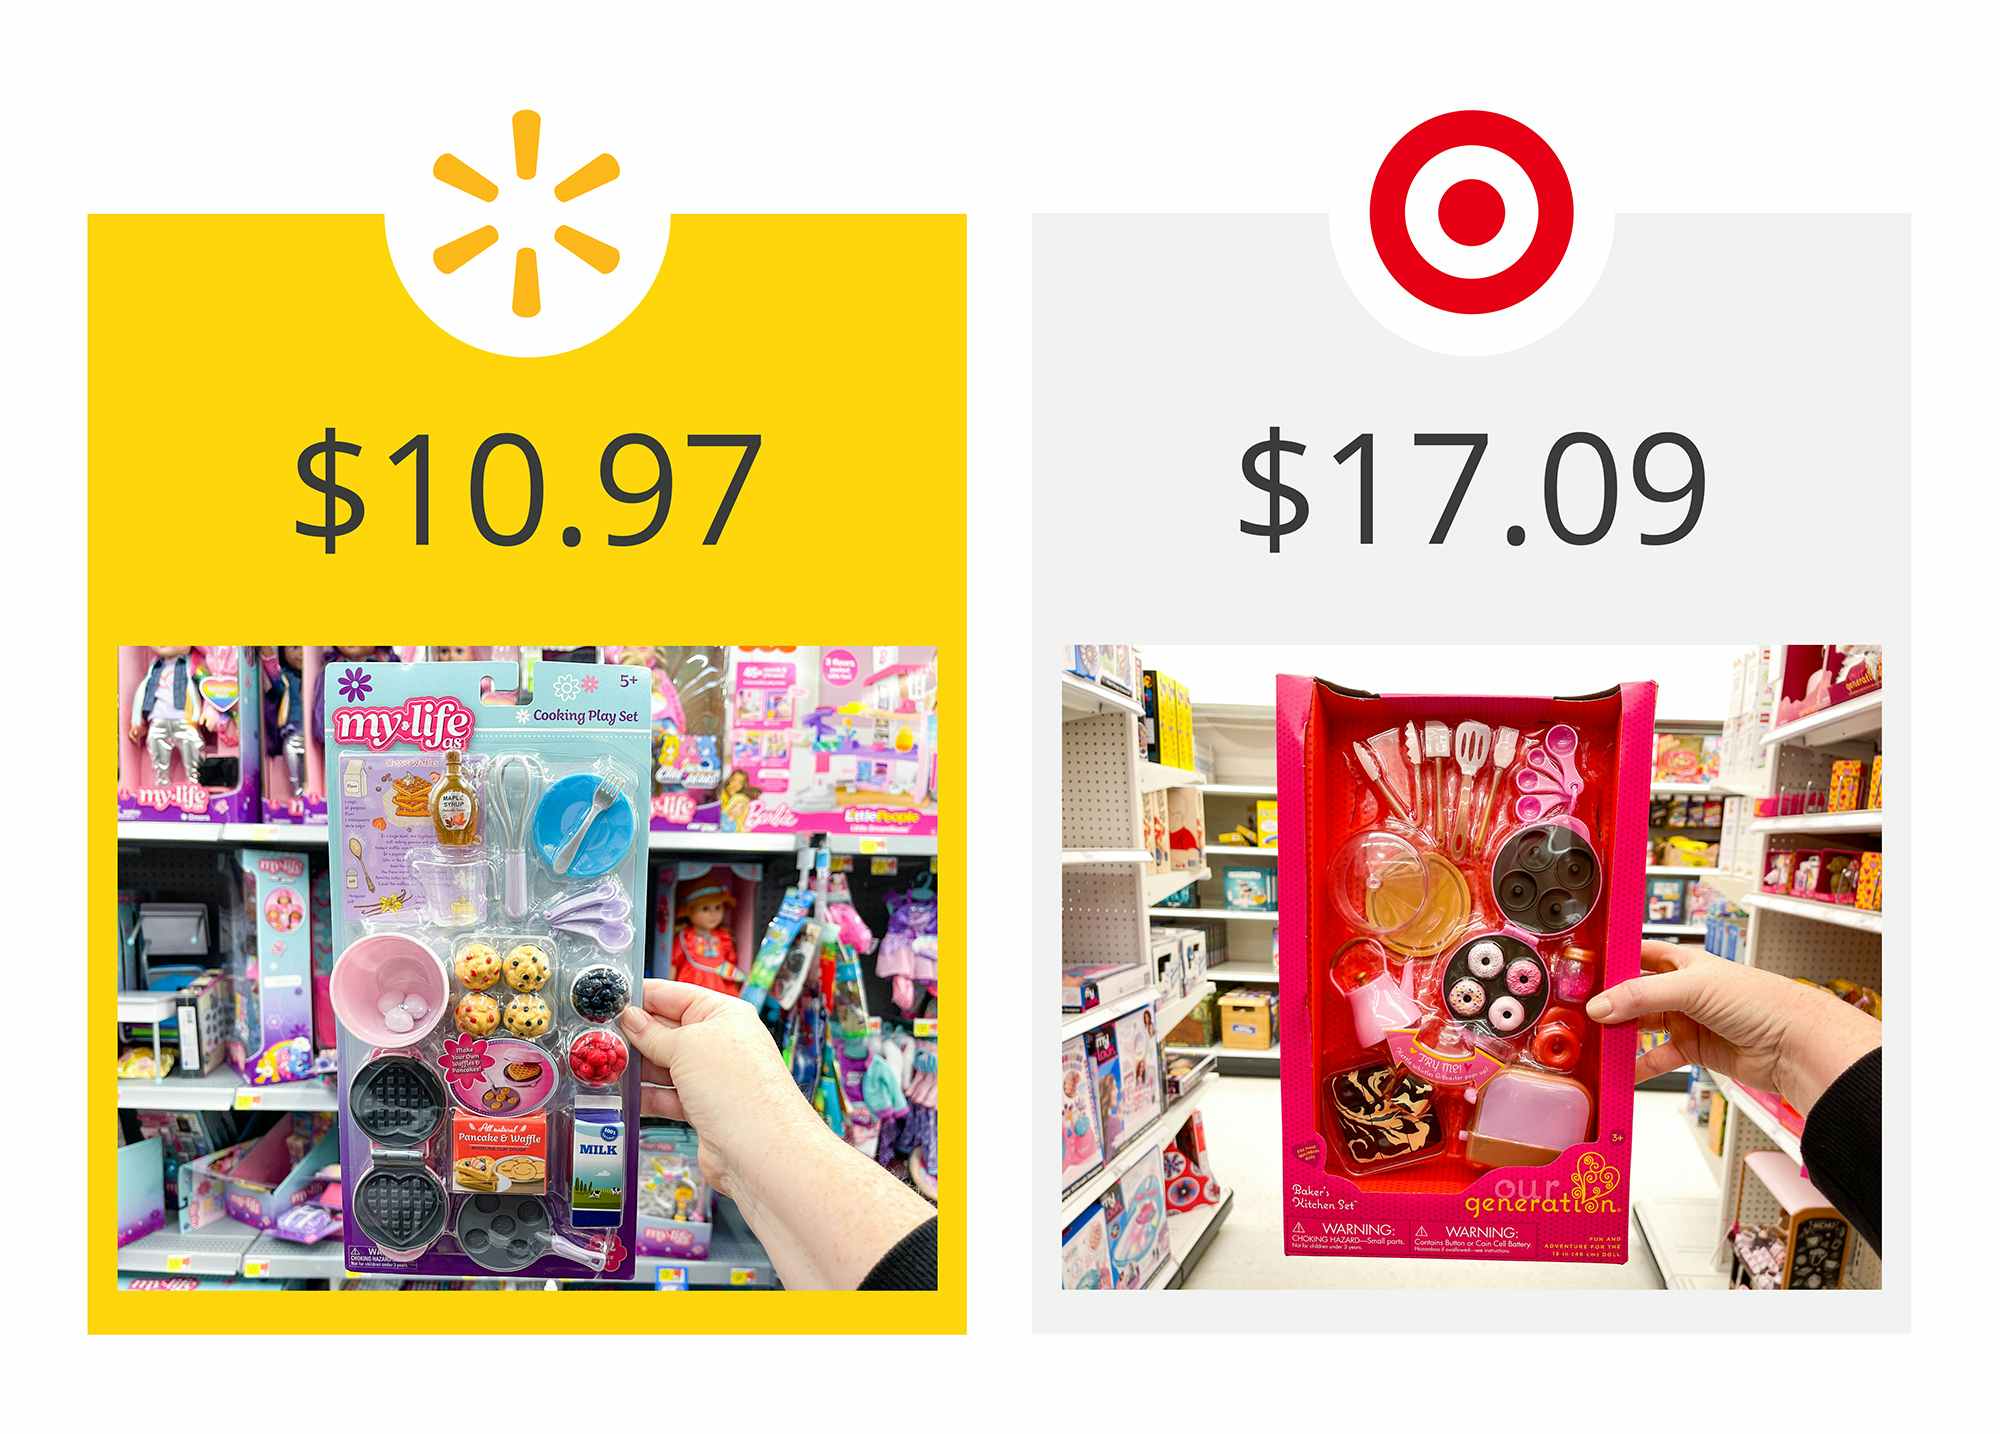 walmart as the winner on a graphic showing price comparison between target's our generation and walmart's my life as doll cooking and baking sets